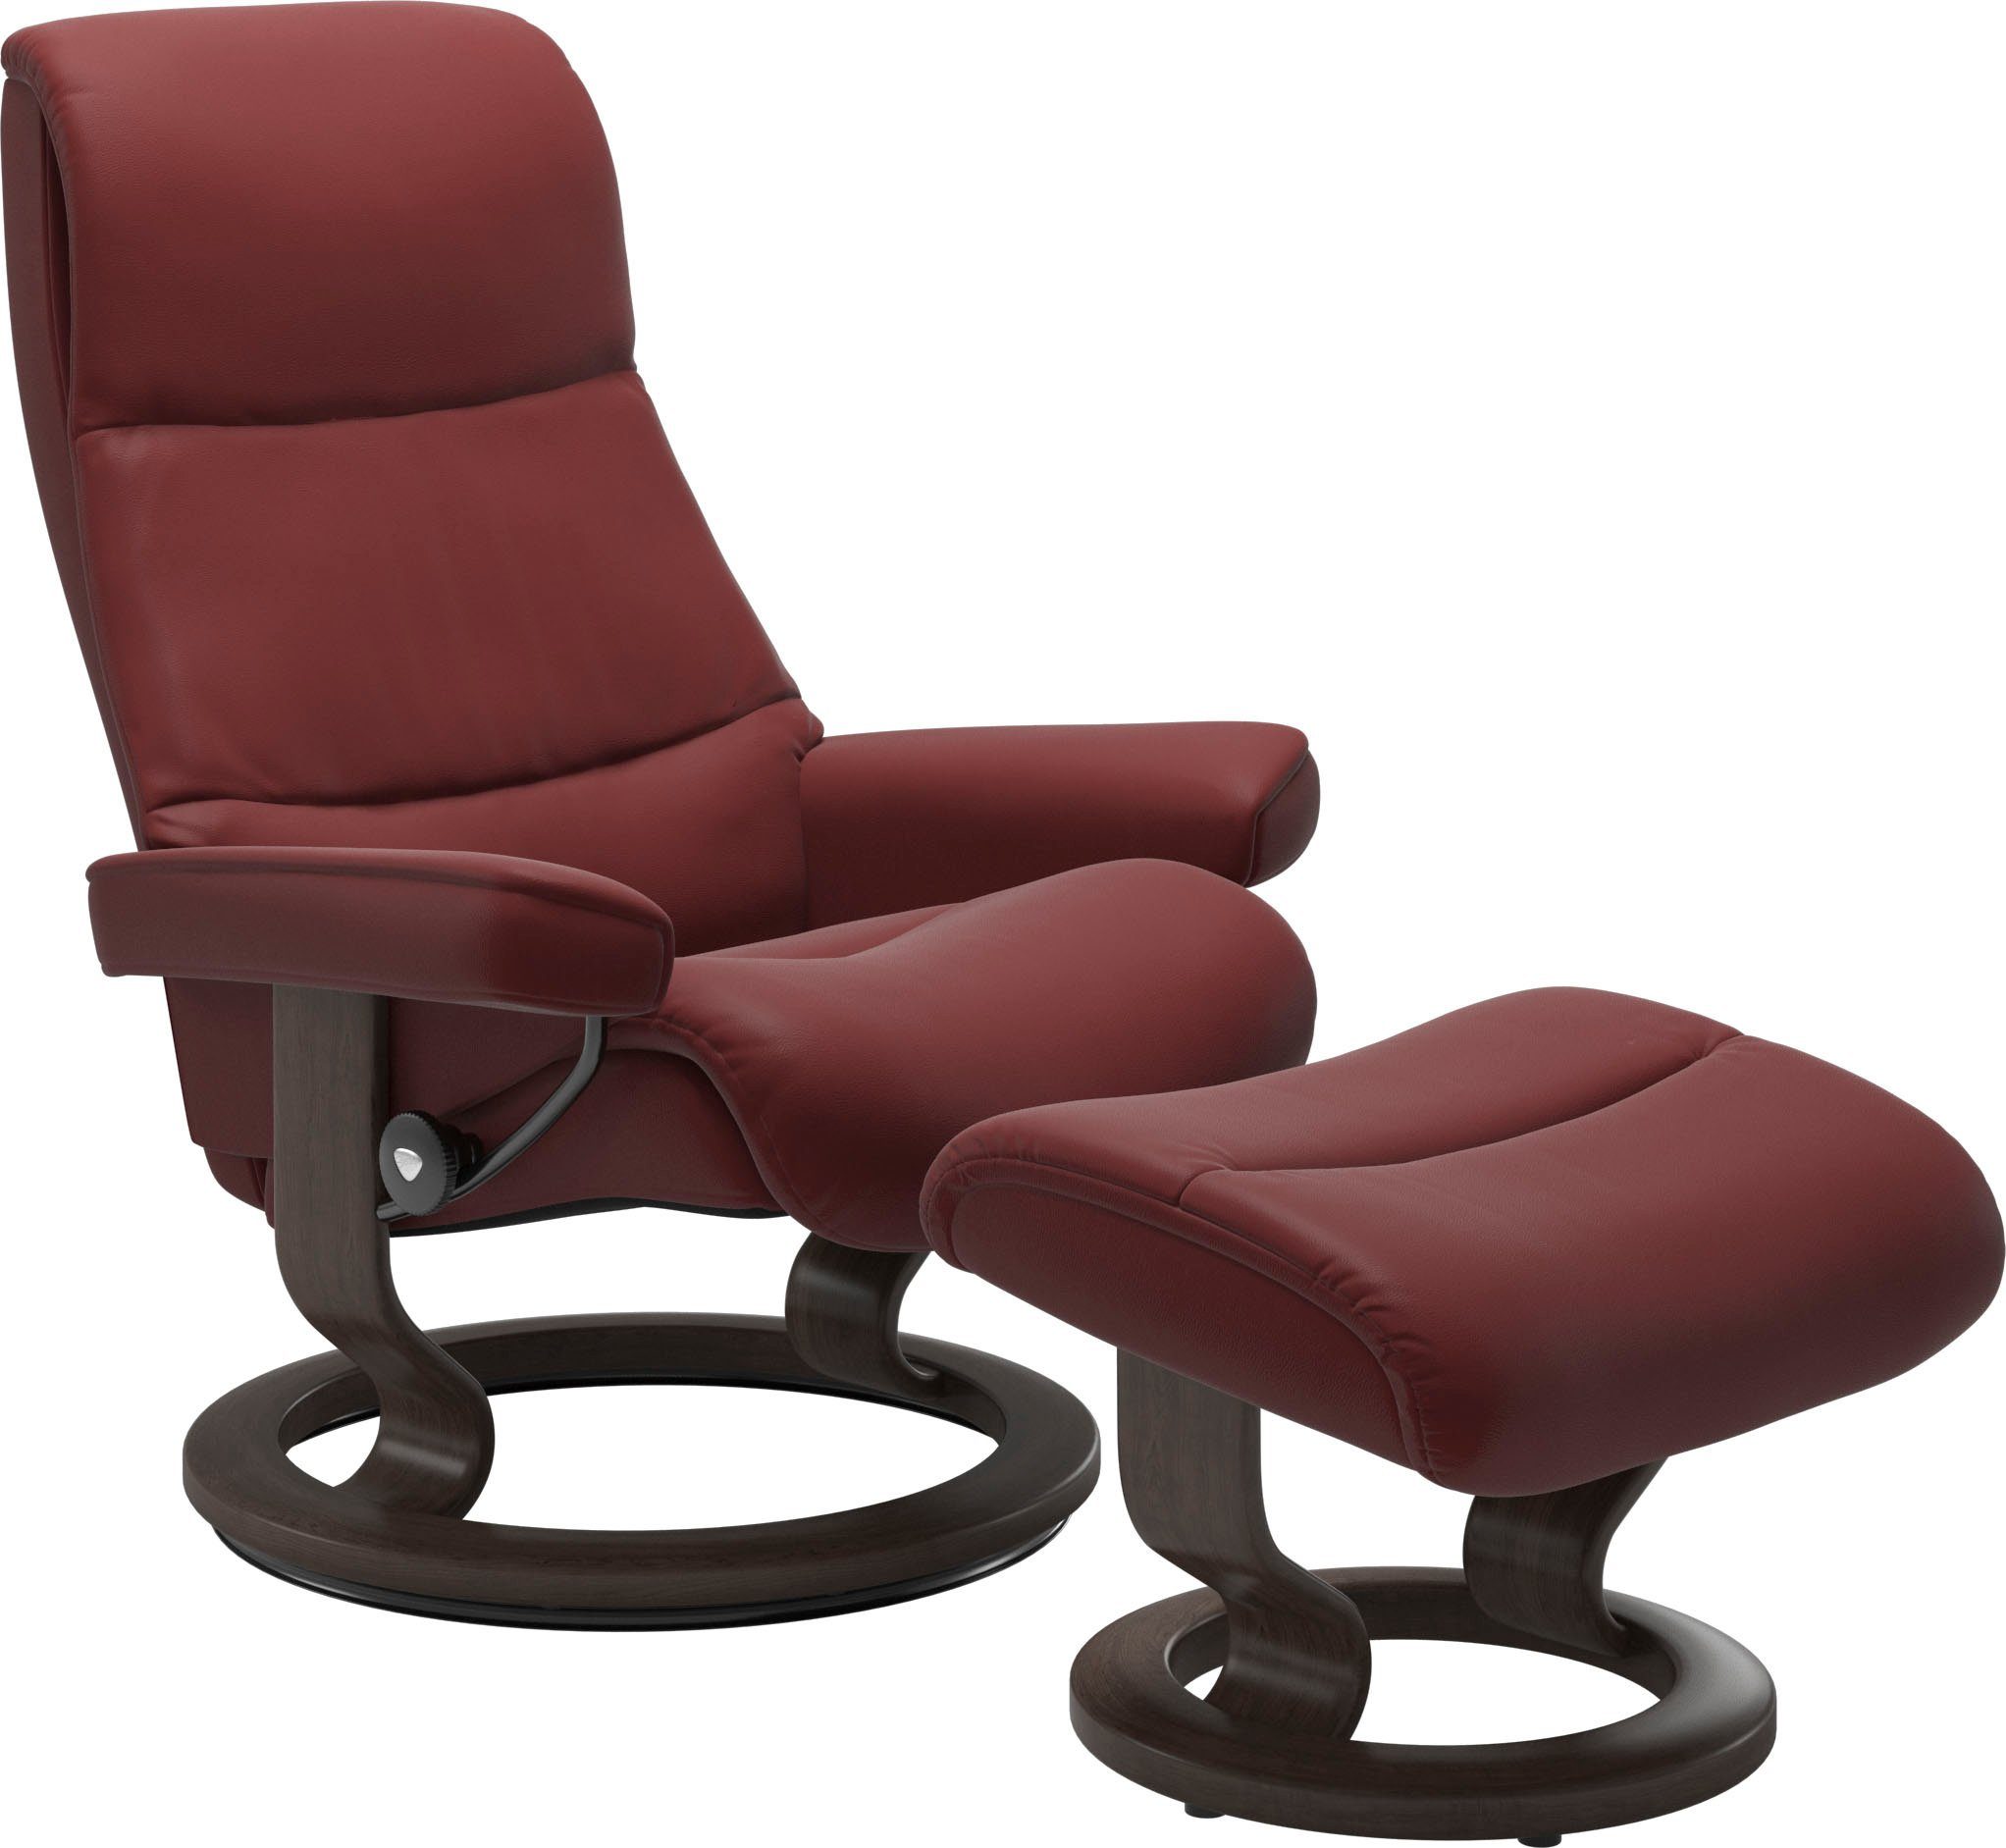 mit Wenge Base, Stressless® S,Gestell Größe Relaxsessel Classic View,